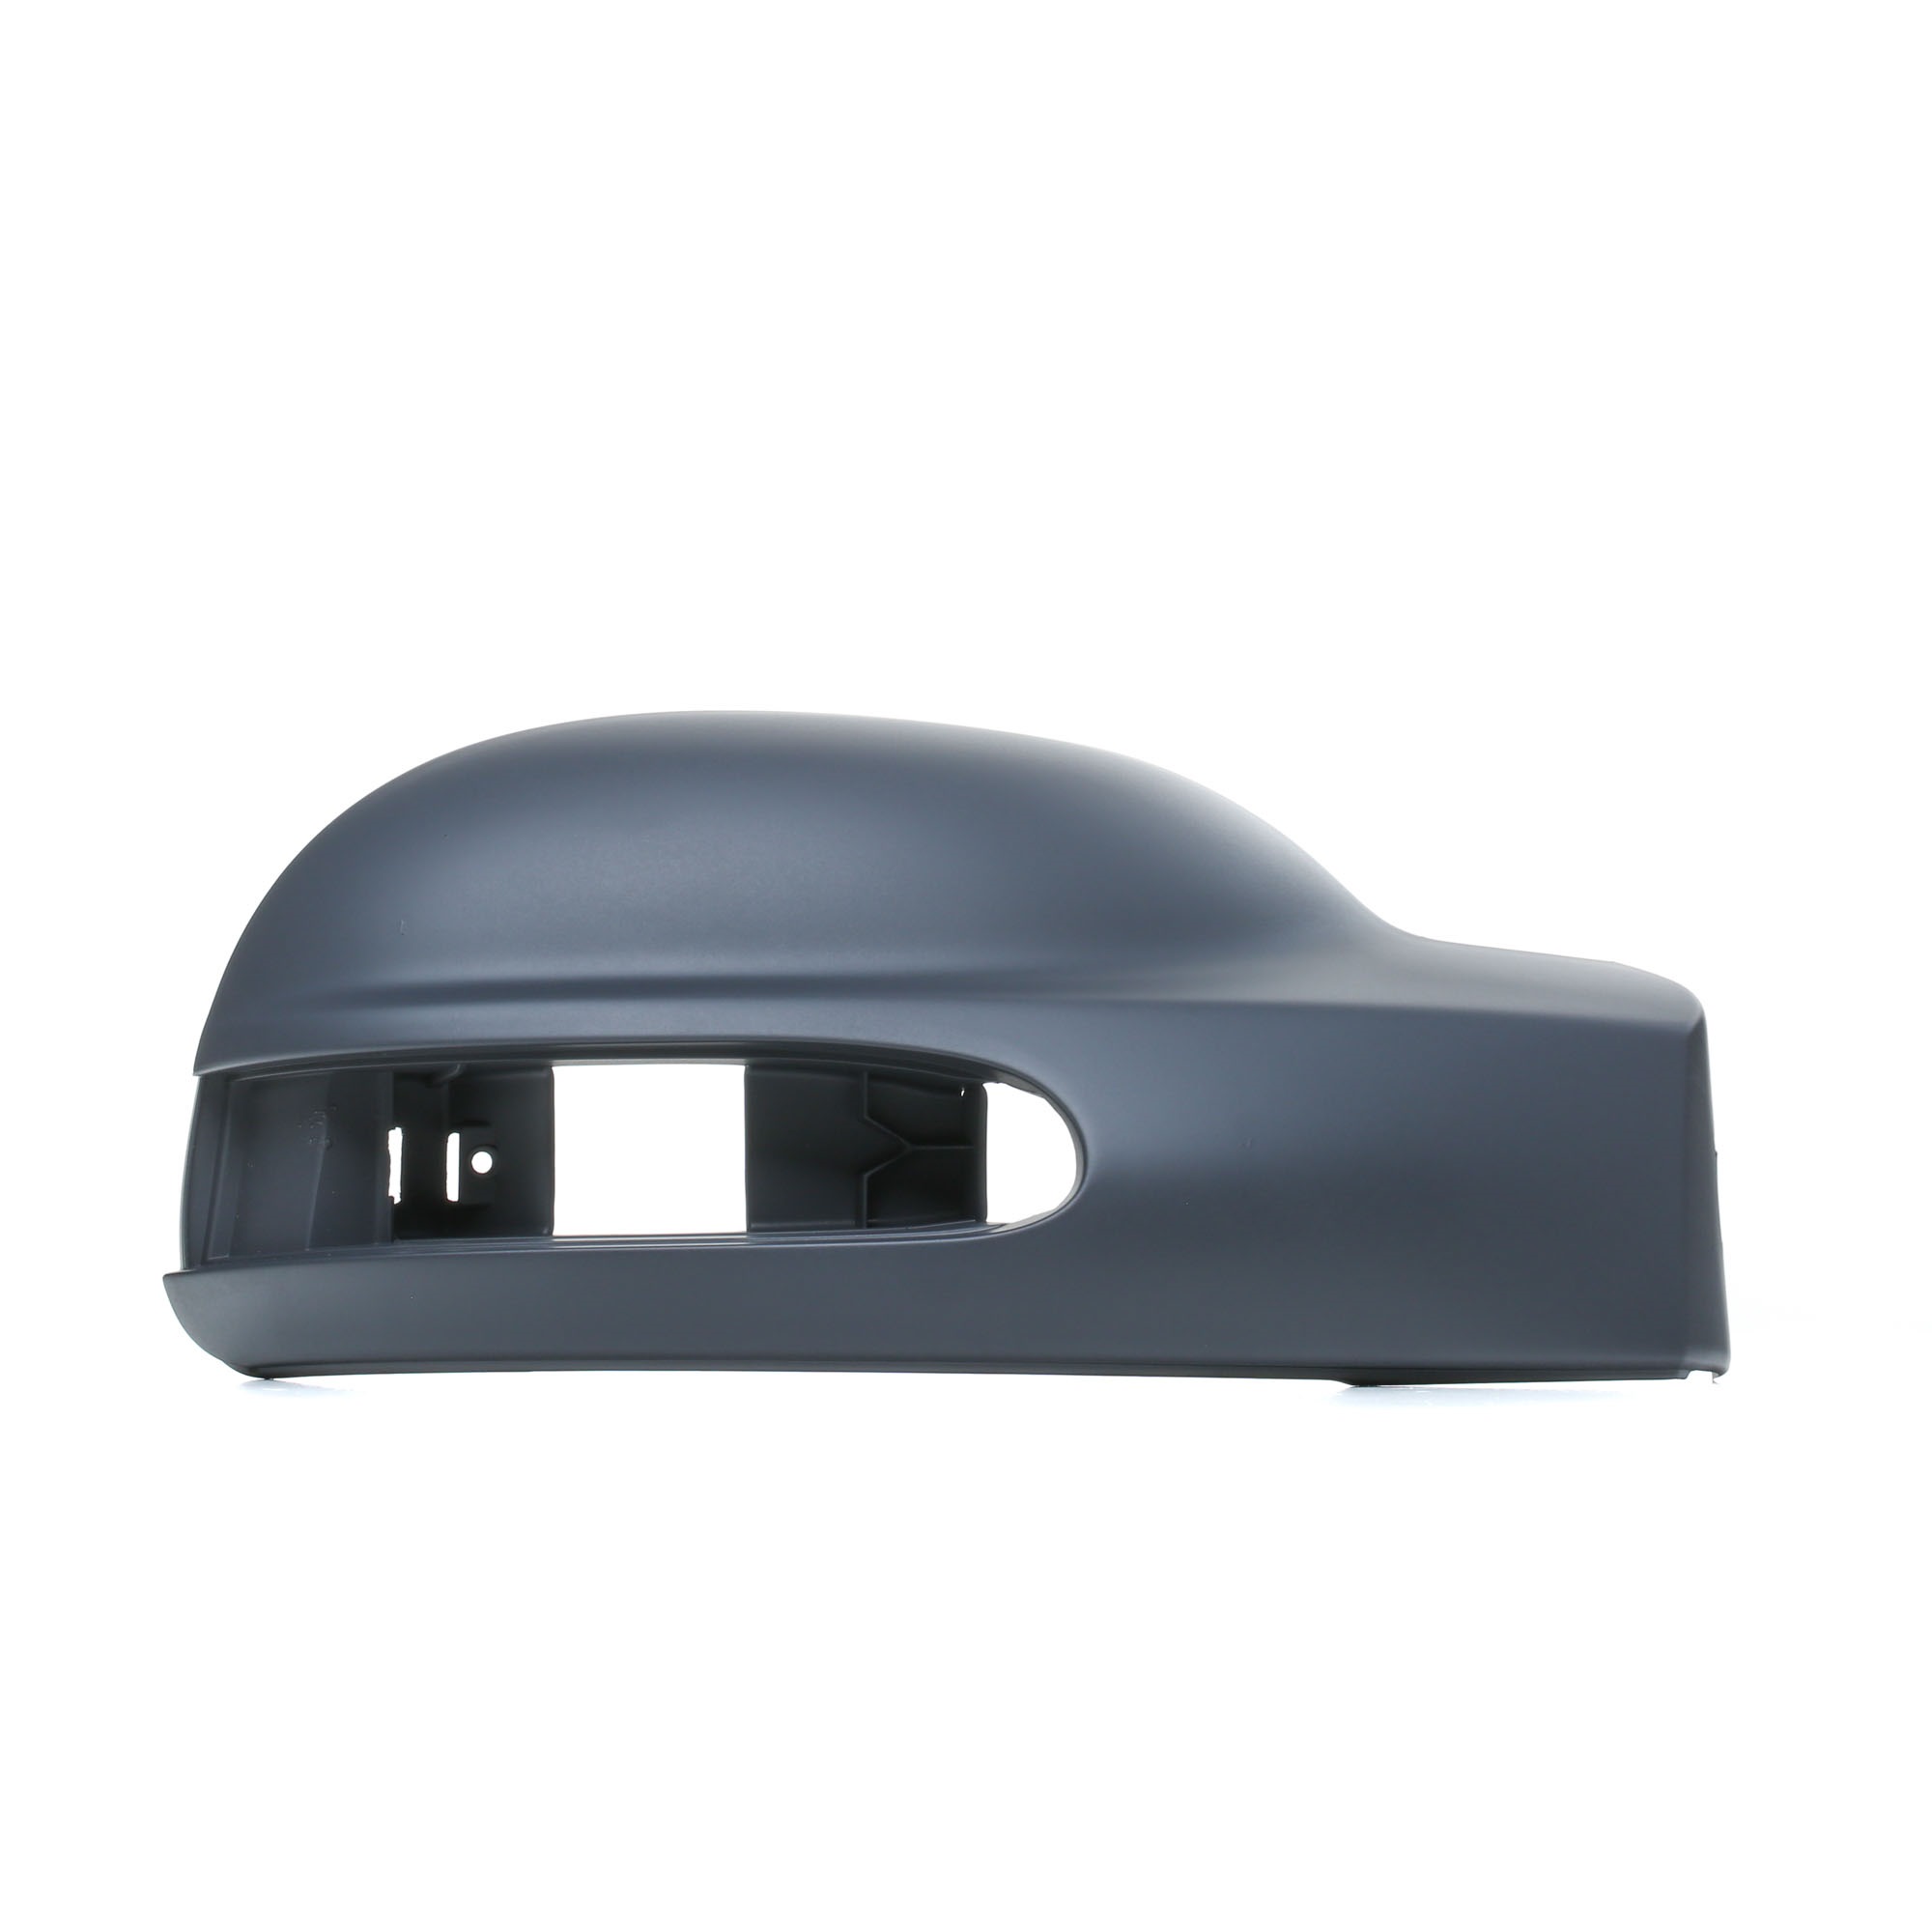 MAGNETI MARELLI Side mirror covers left and right MERCEDES-BENZ E-Class Platform / Chassis (VF211) new 351991202380